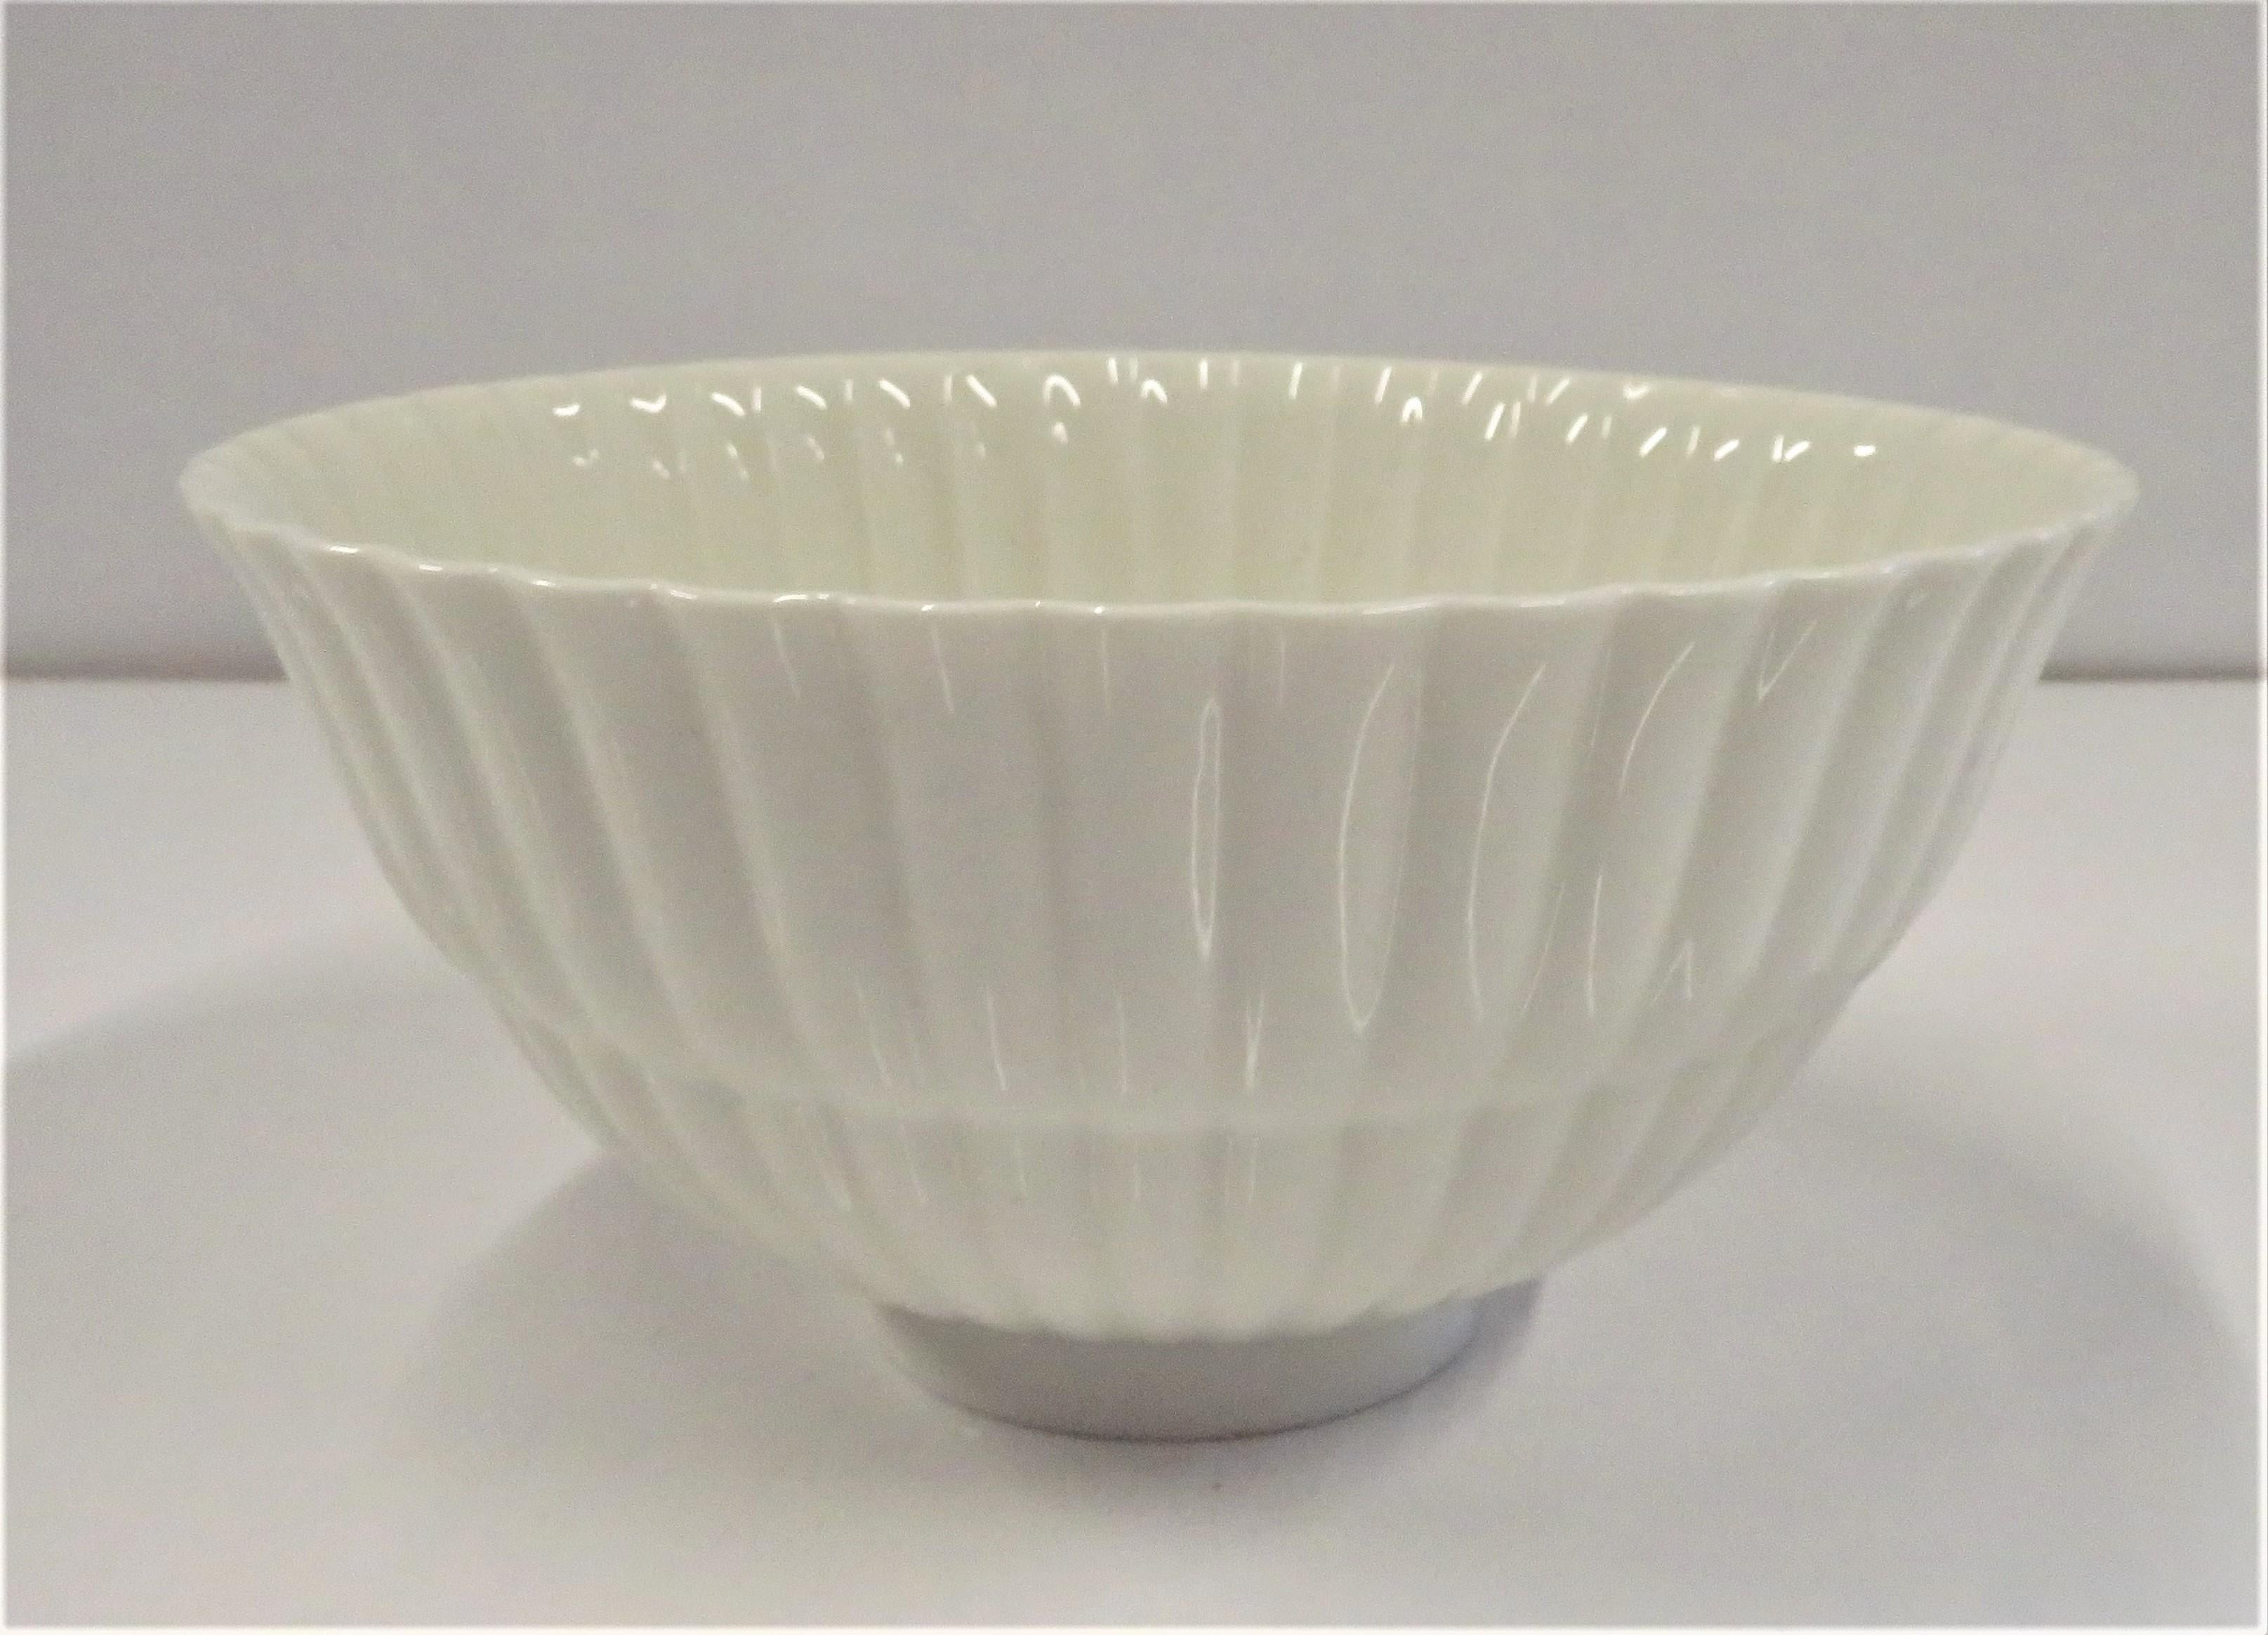 Lovely Blanc de Chine Porcelain decorative bowl by Hans Henrik Hansen -1894-1965 - Denmark for Royal Copenhagen. With an Art Deco sensibility, it is unique, elegant and finely made as Royal Copenhagen is most noted for. This bowl is stamped #3422